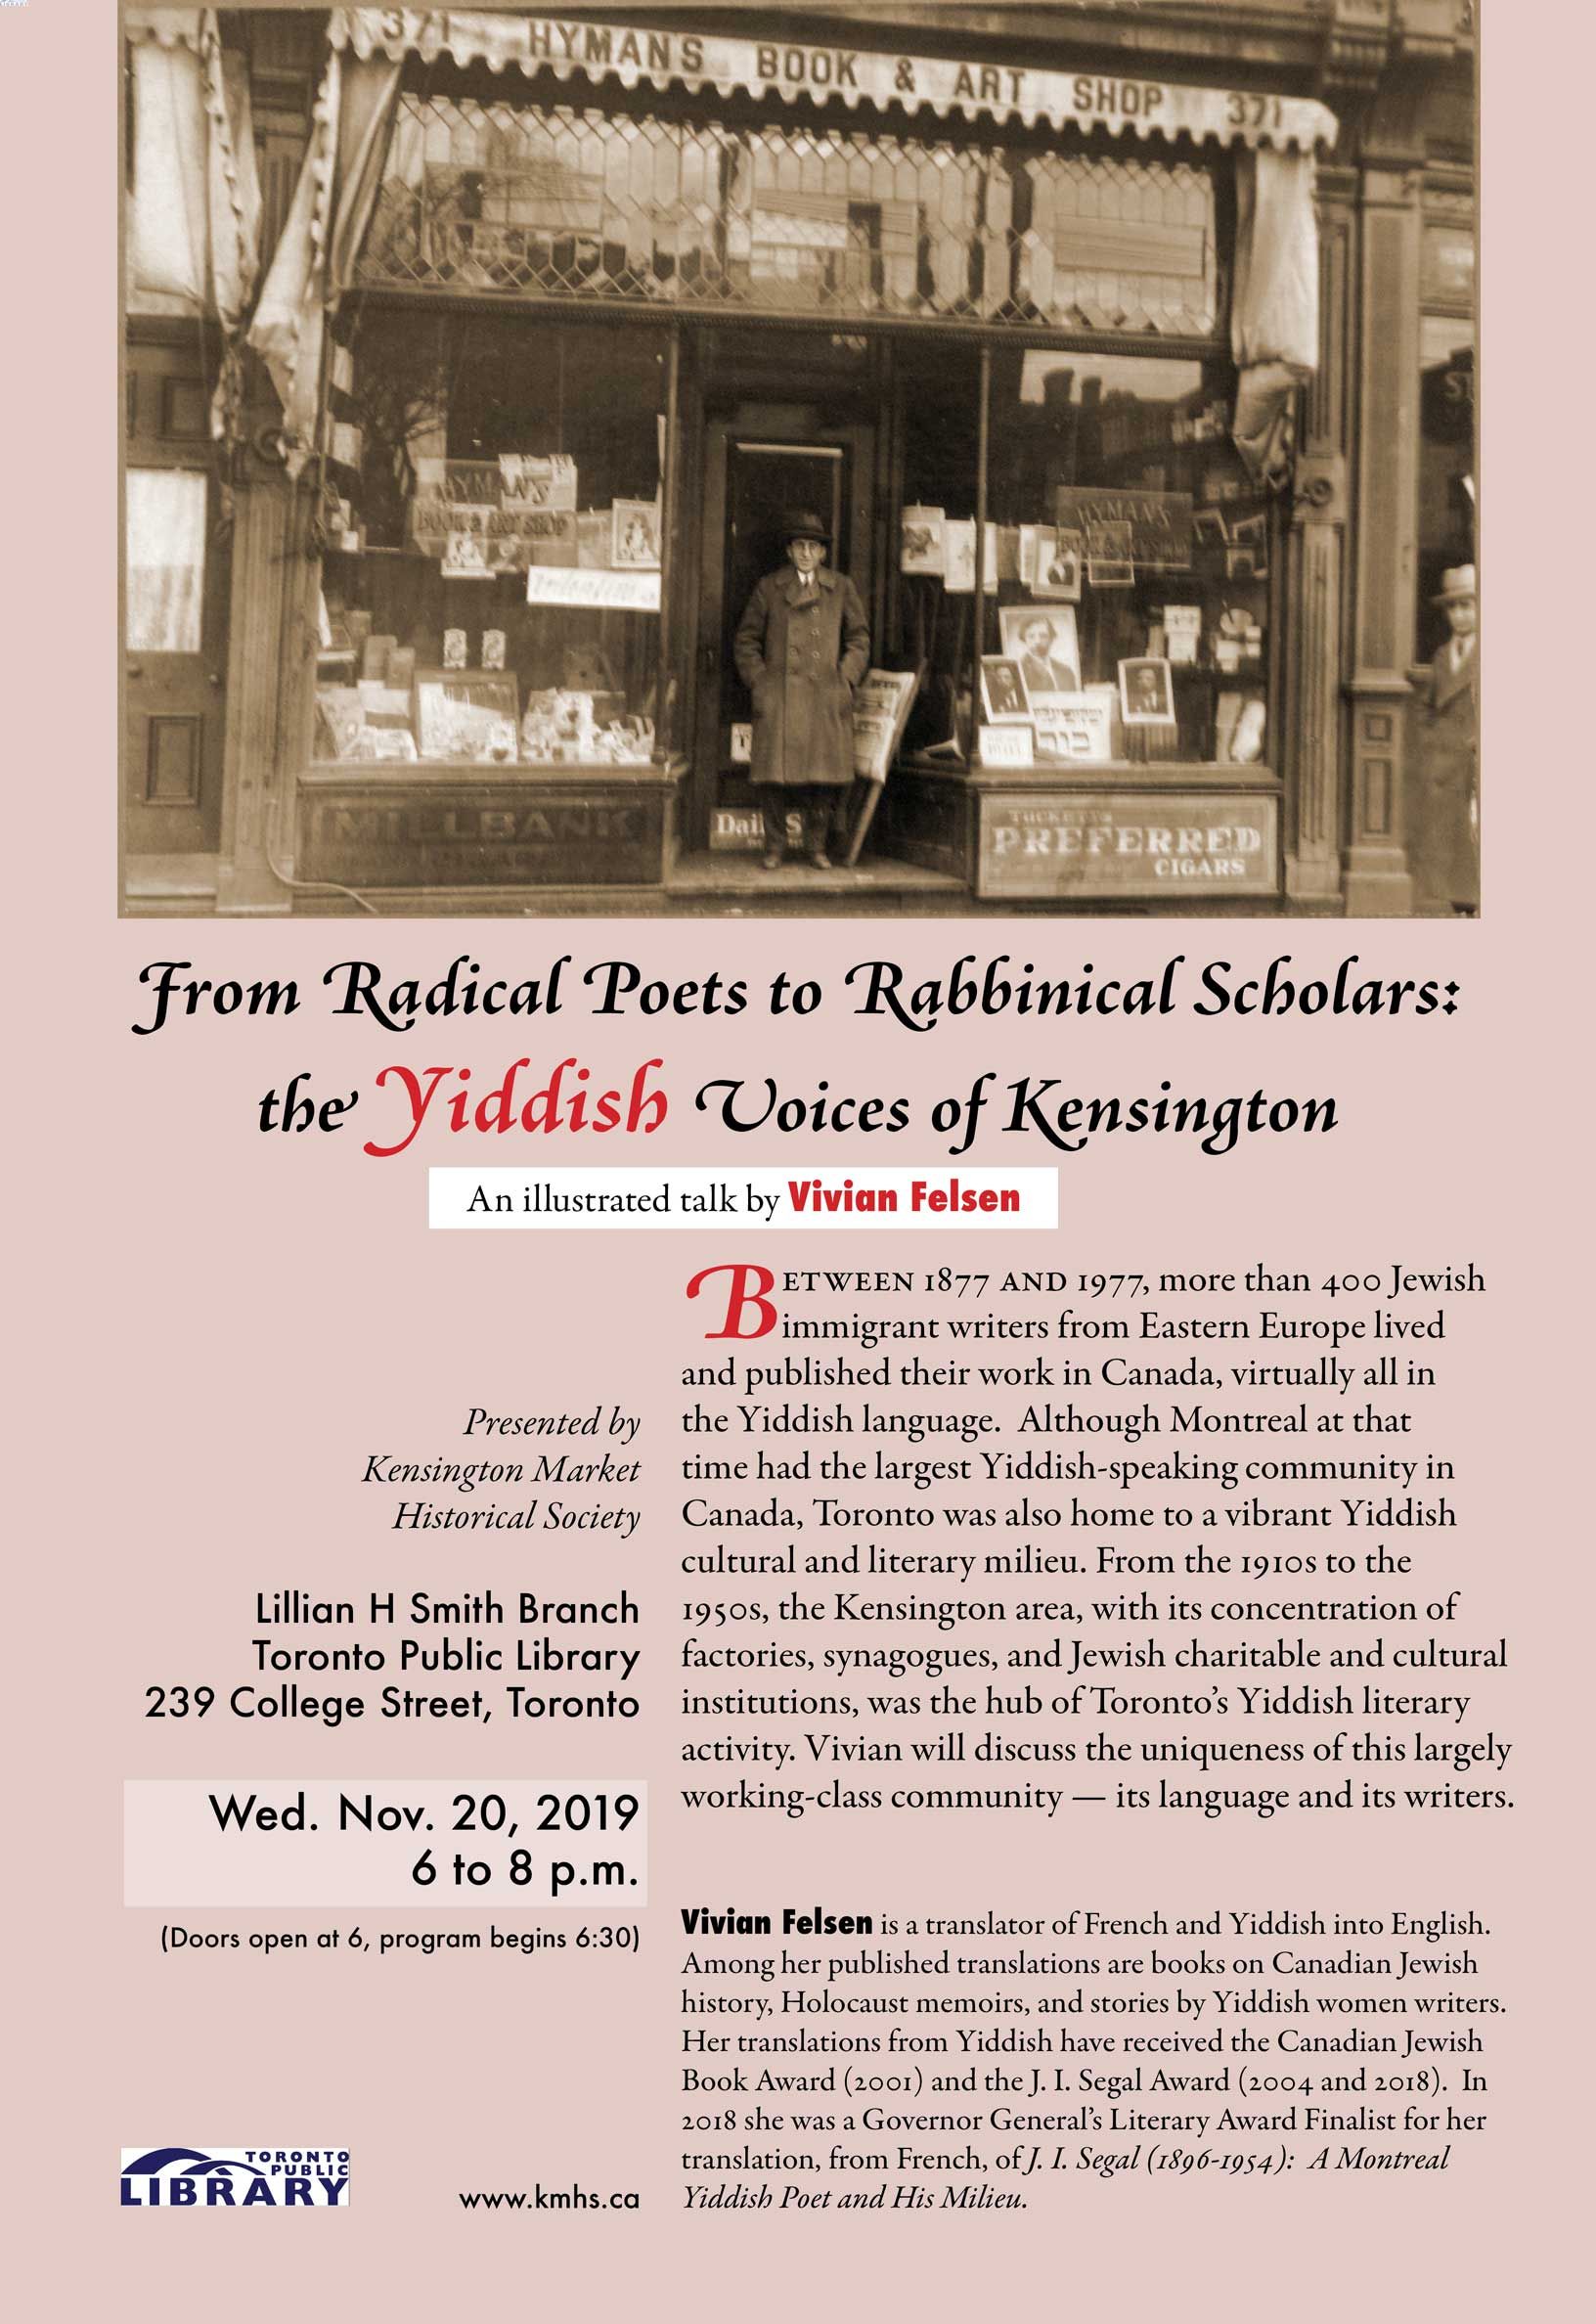 Flyer for "From Radical Poets to Rabbinical Scholars - the Yiddish Voices of Kensington